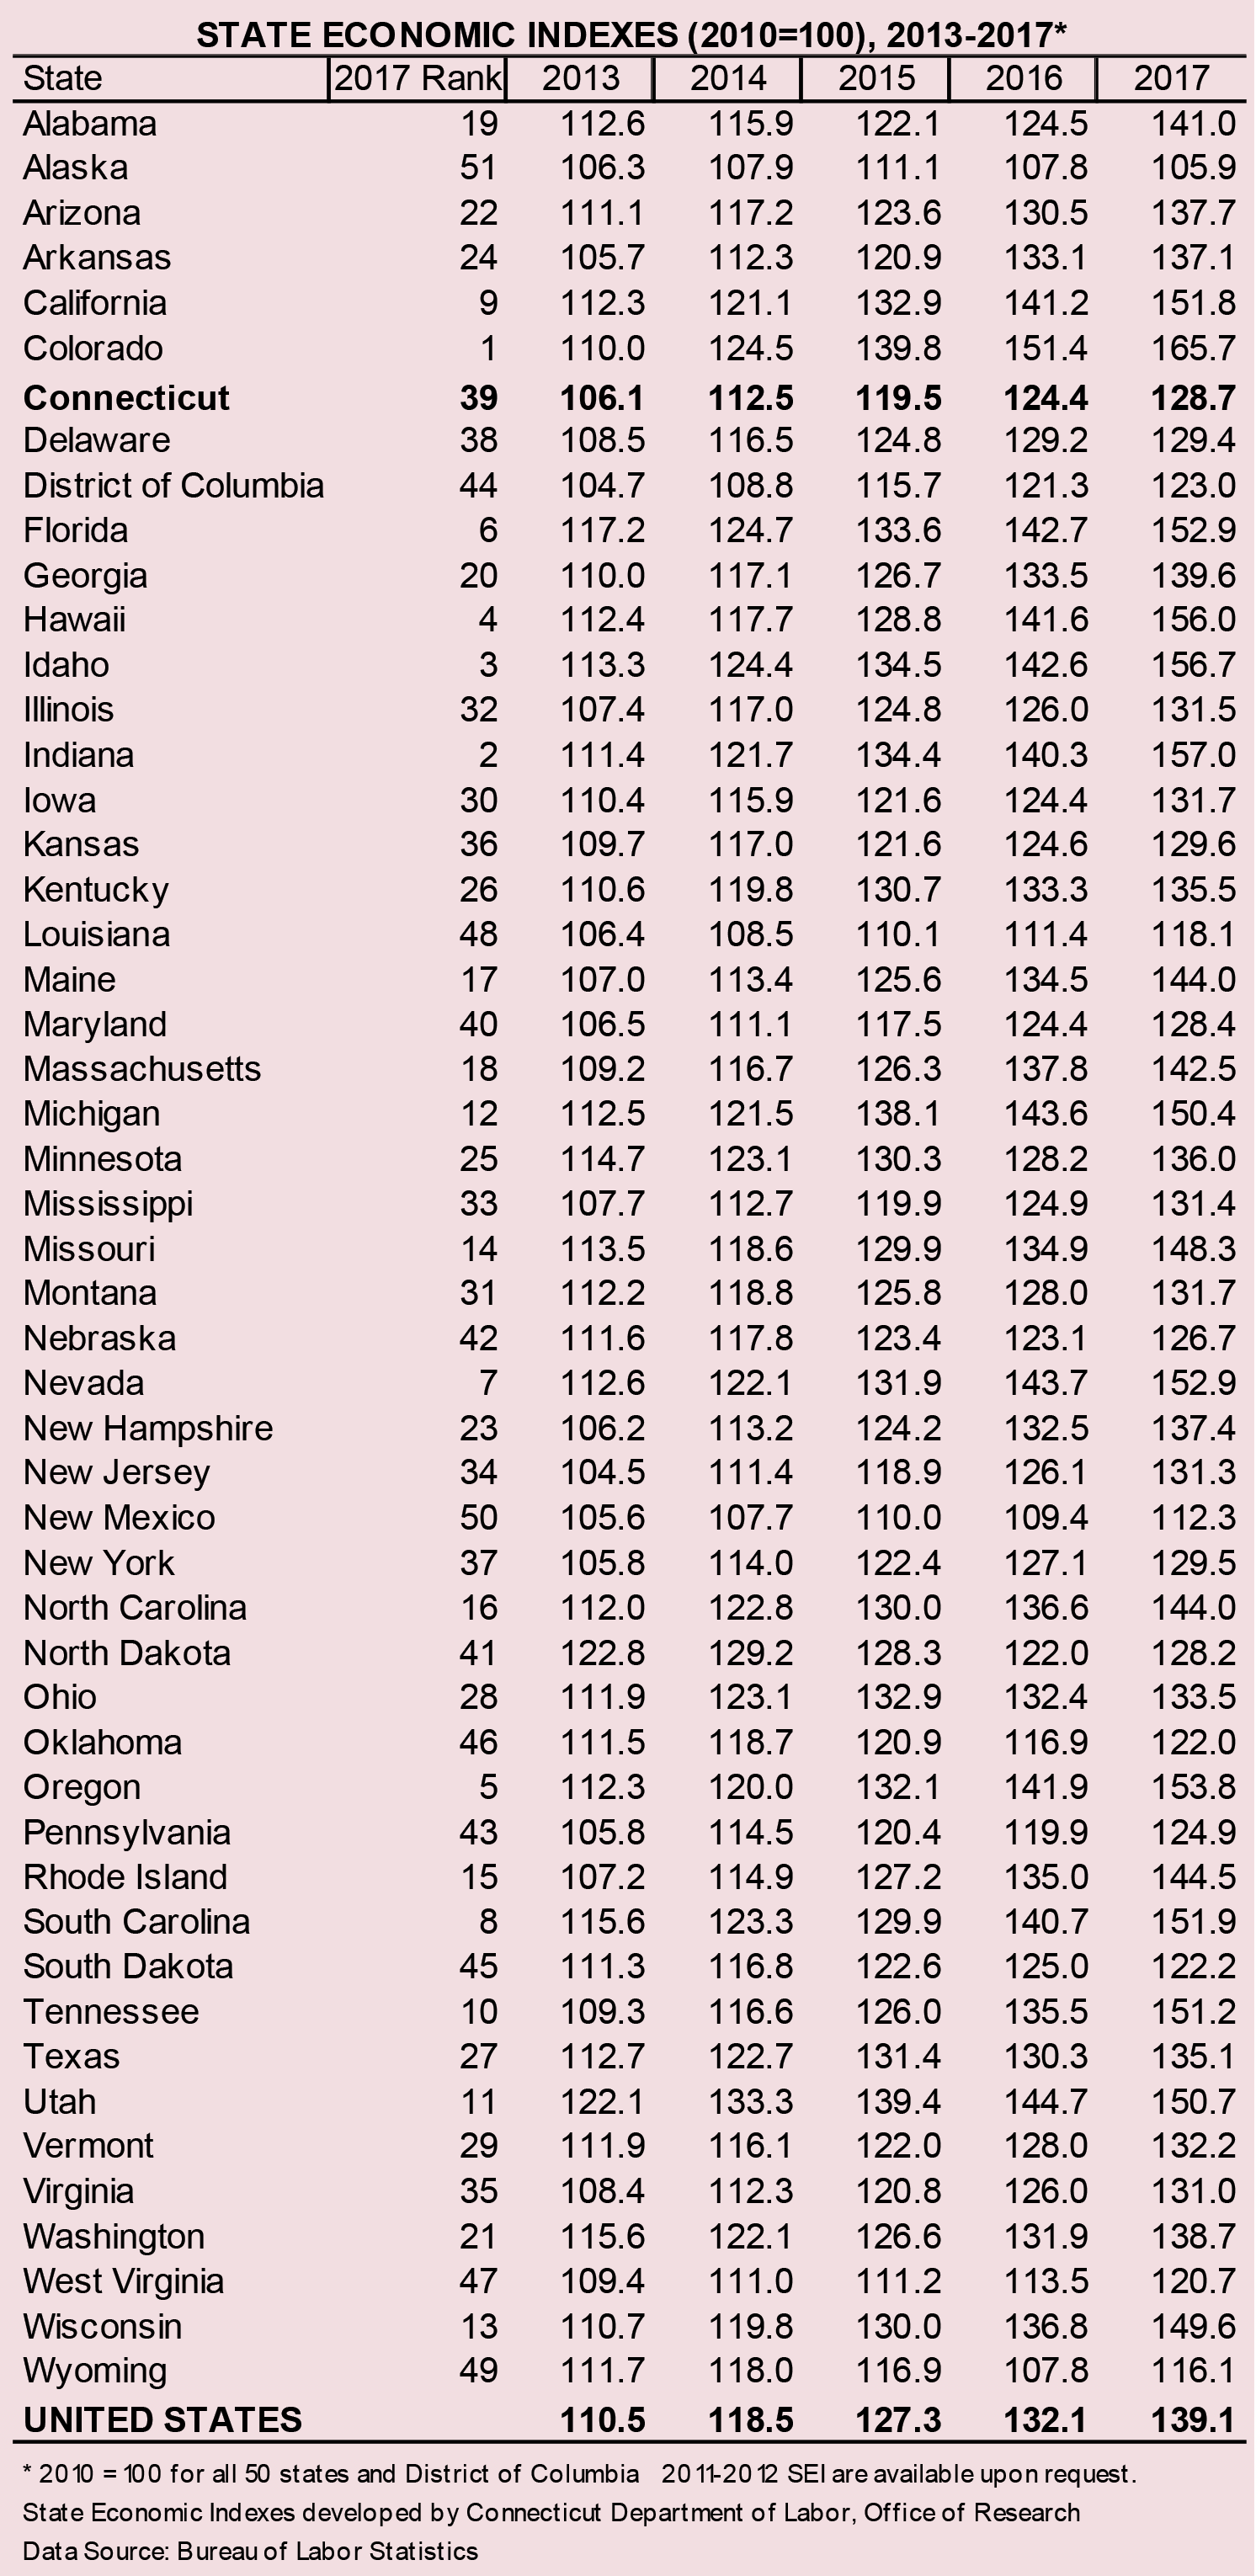 Table. STATE ECONOMIC INDEXES (2010=100), 2013-2017*